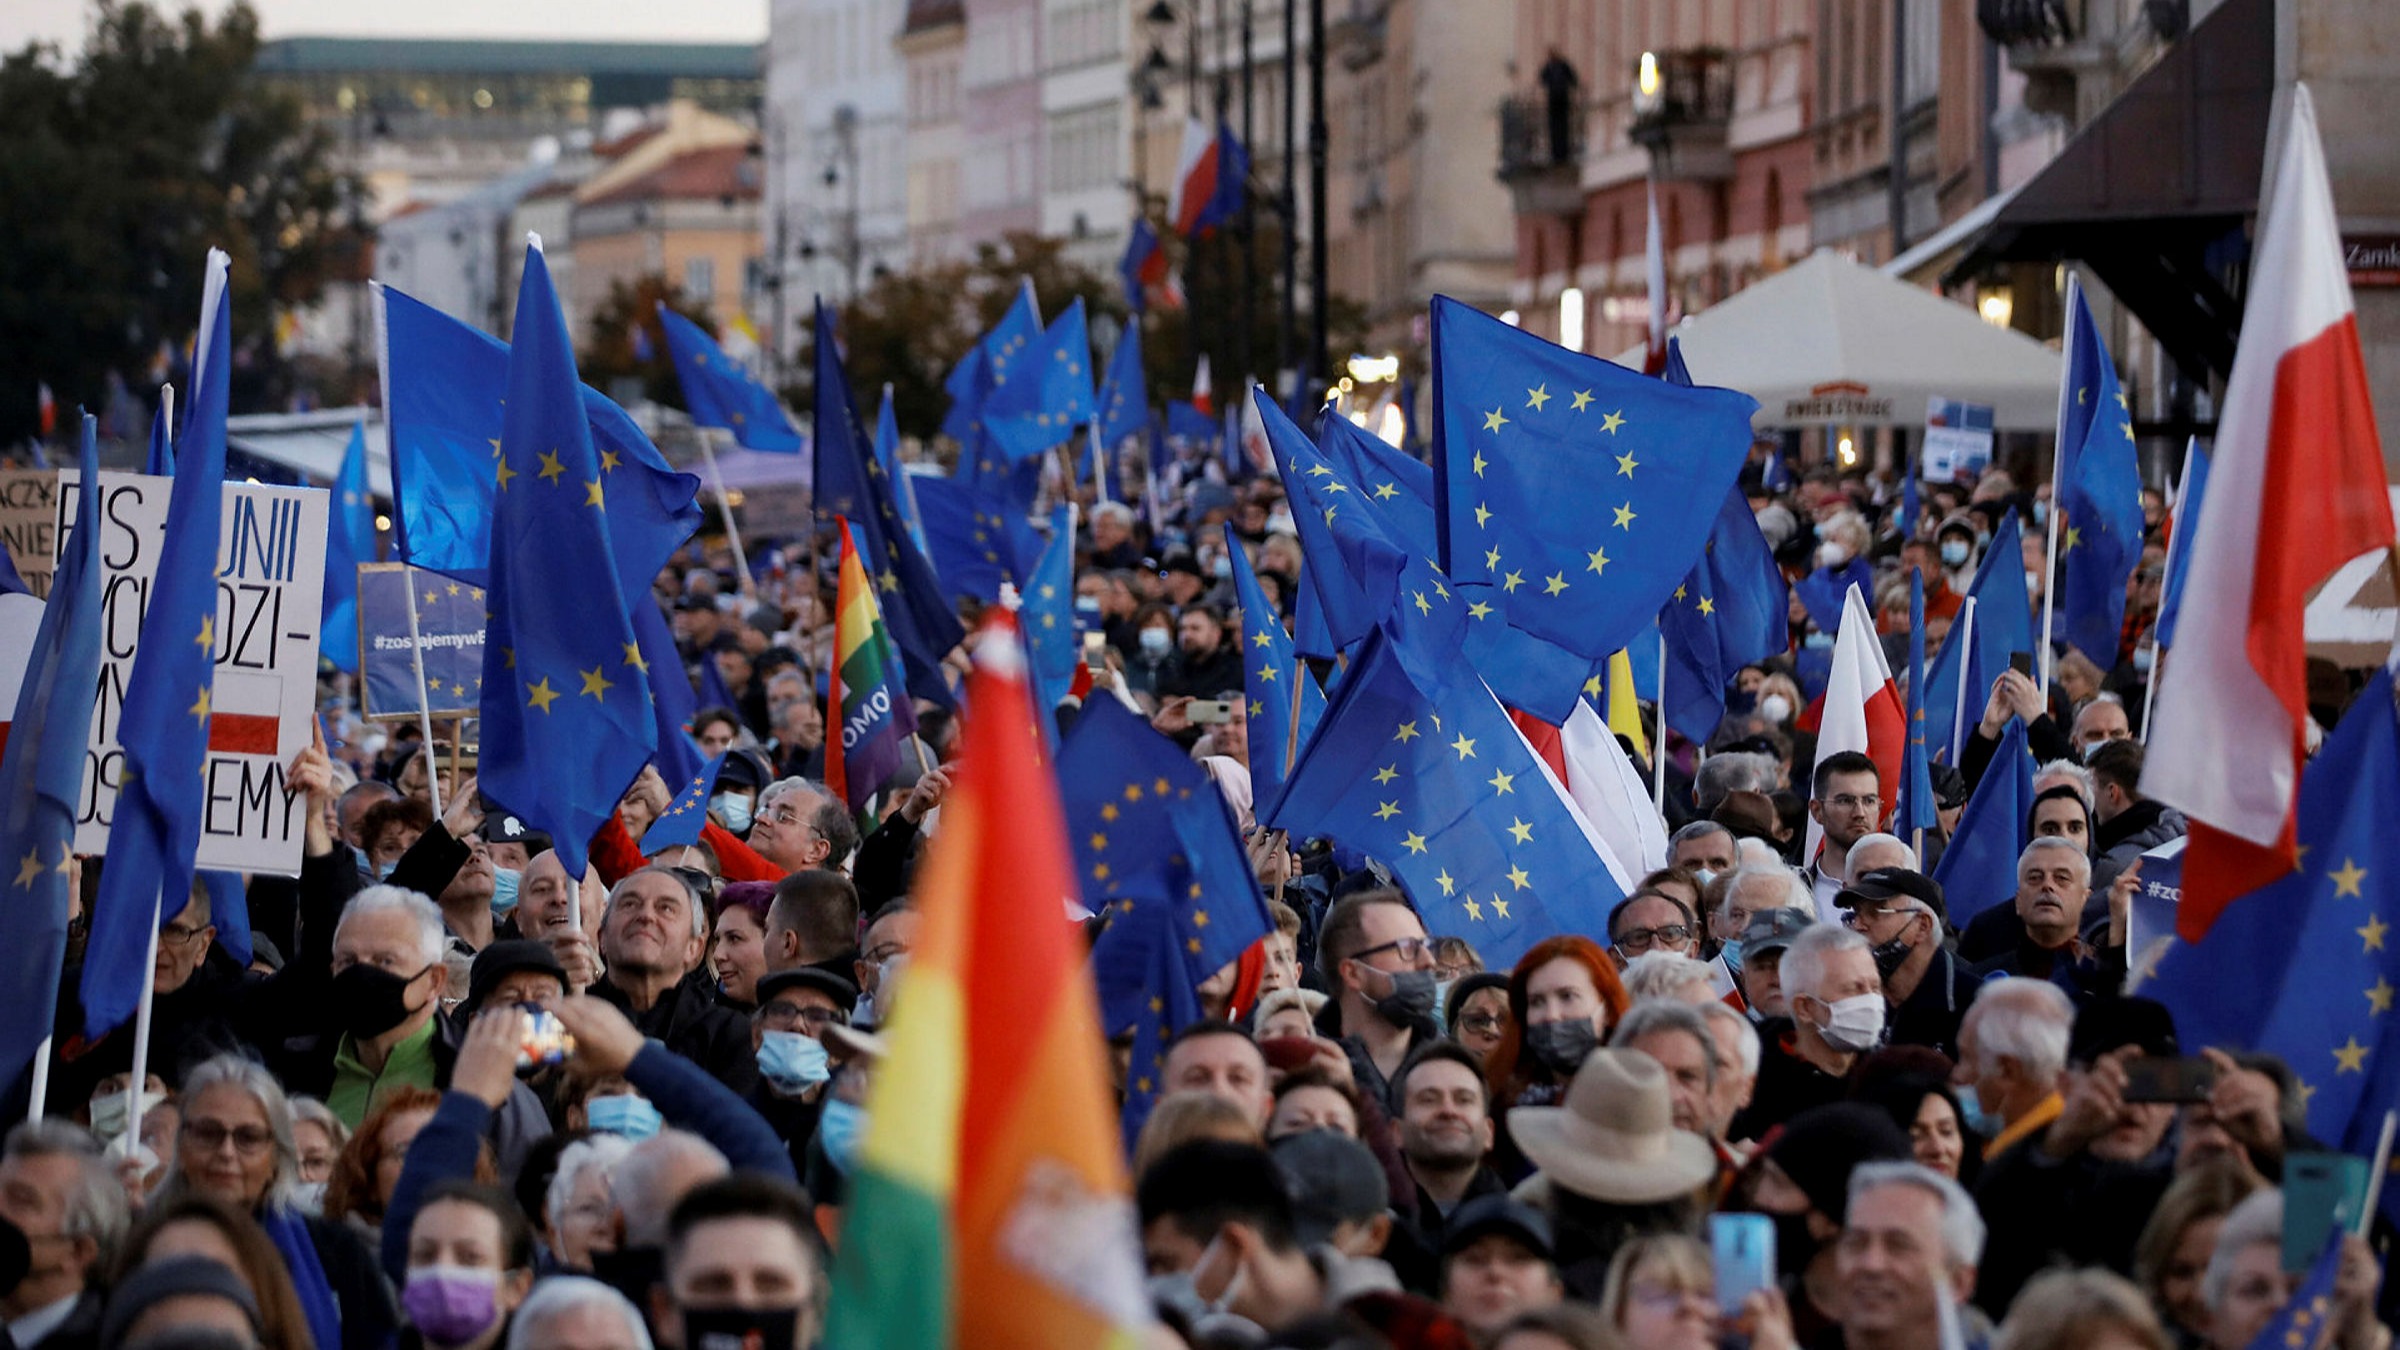 Tens of thousands flock to pro-EU demonstrations in Polish cities | Financial Times